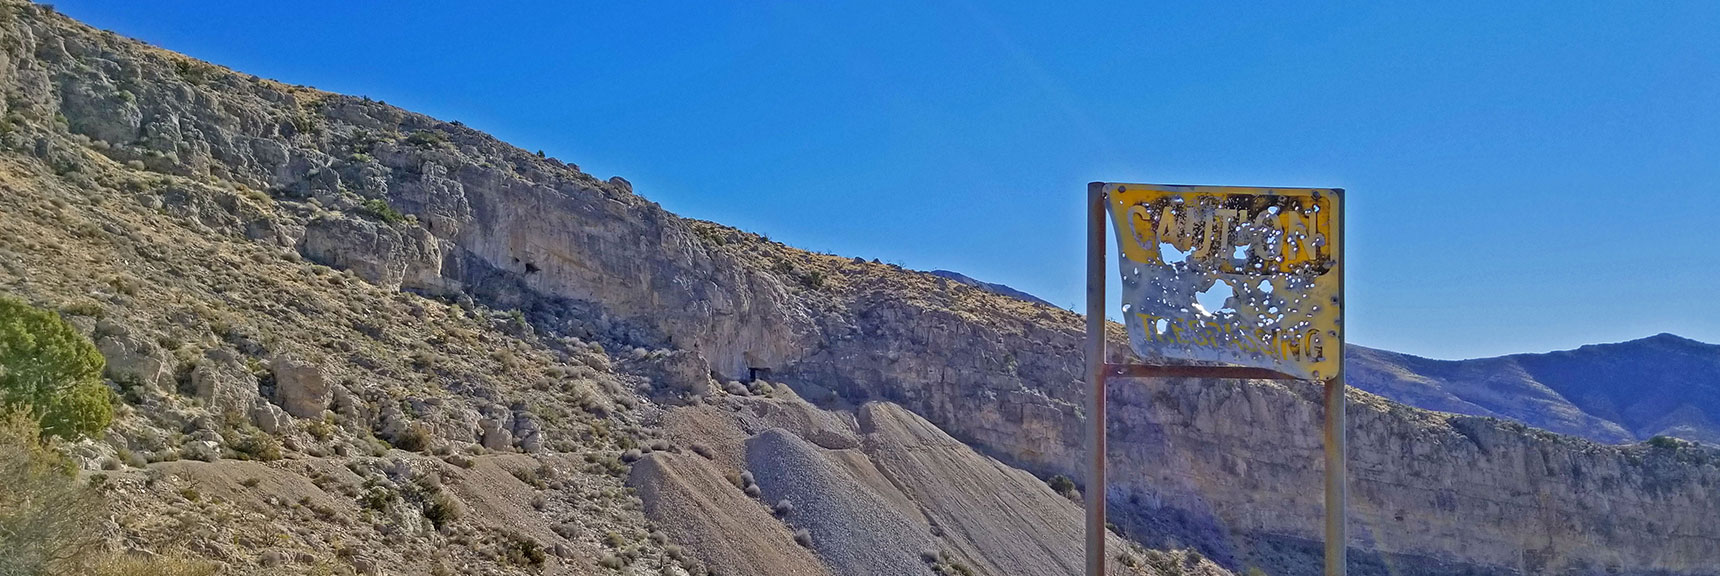 Upon Arrival at the Railroad Site One Can See the Abandoned Potosi Mine | Potosi Mt. Summit via Western Cliffs Ridgeline, Spring Mountains, Nevada